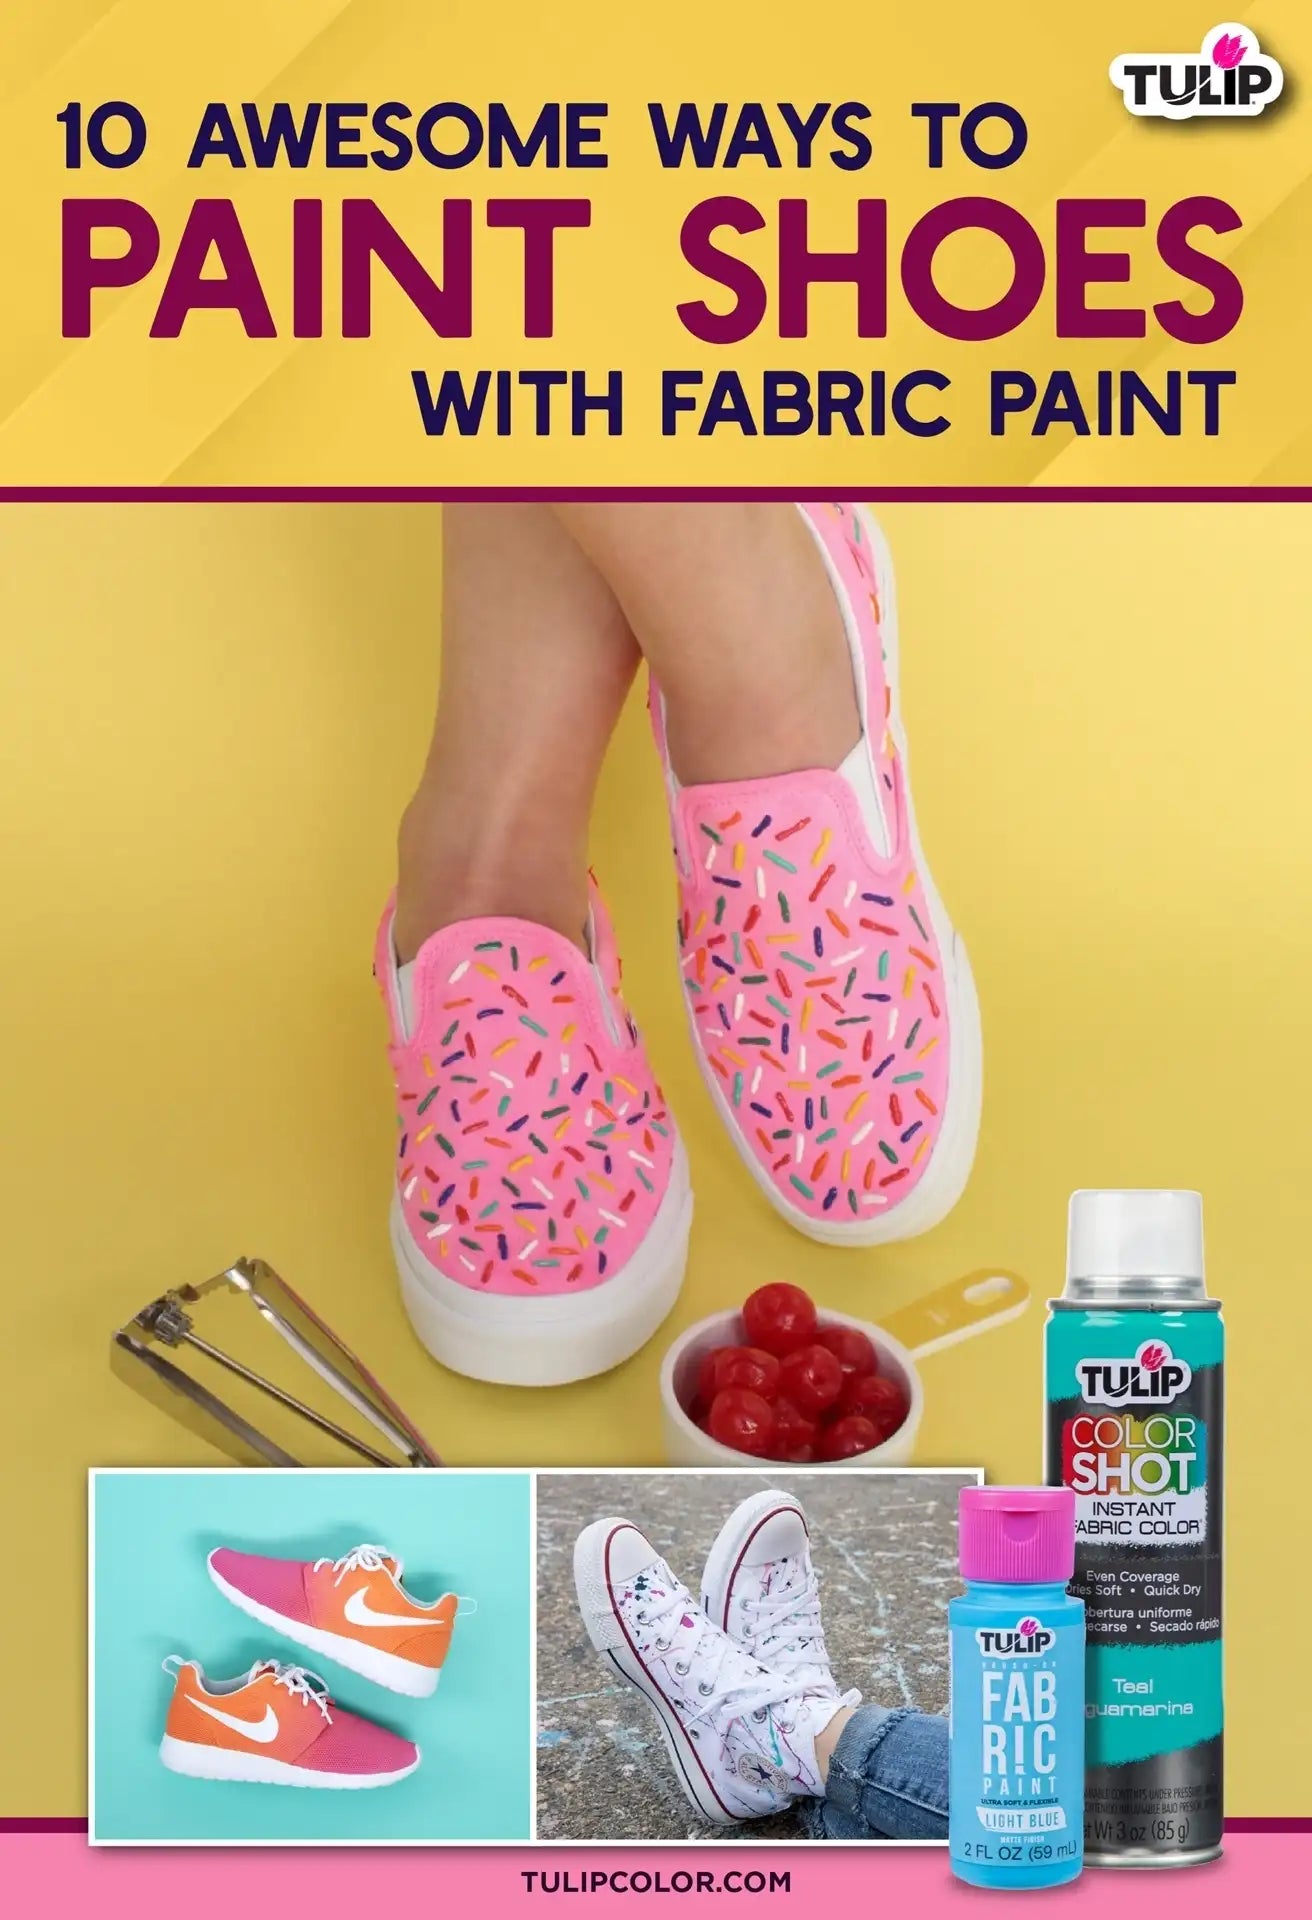 Style your festive look with Cloth fabric painting design